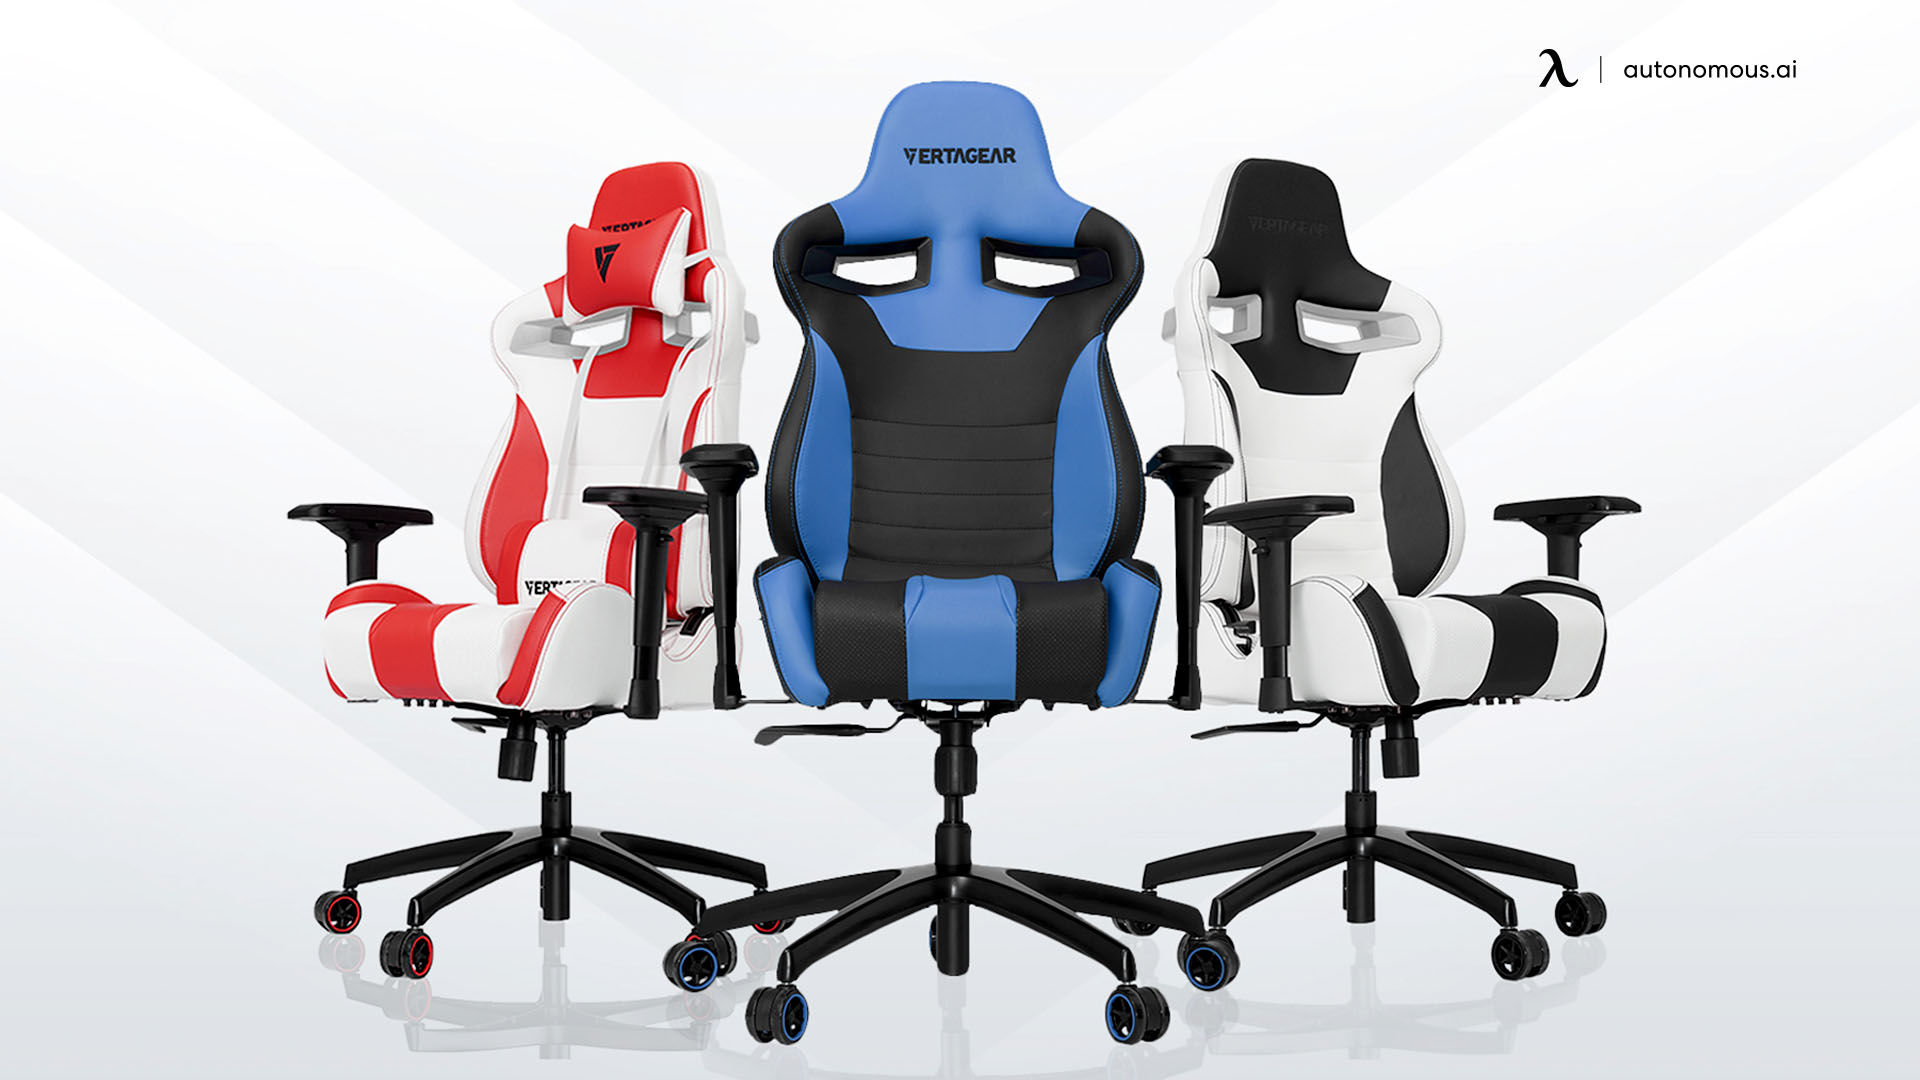 Vertagear SL4000 gaming chair with neck support